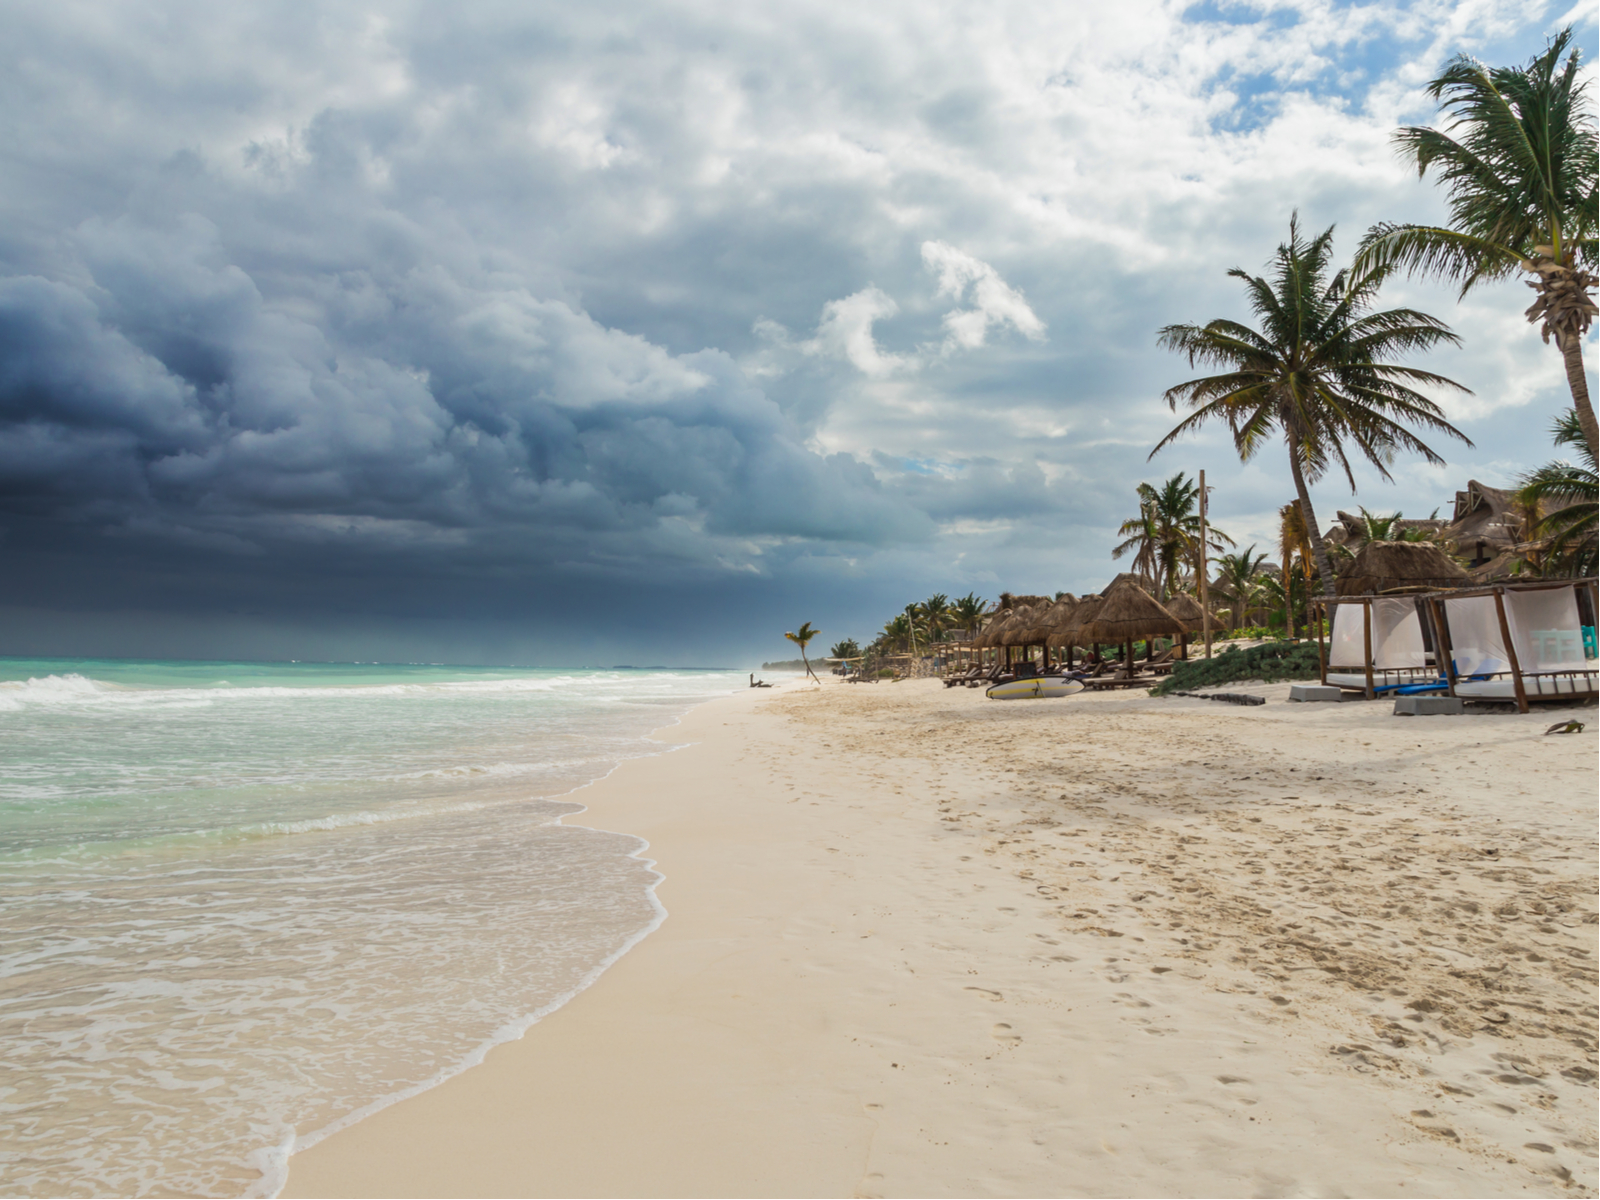 Tropical storm pictured during the worst time to visit Cancun with a giant rain cloud over the beach